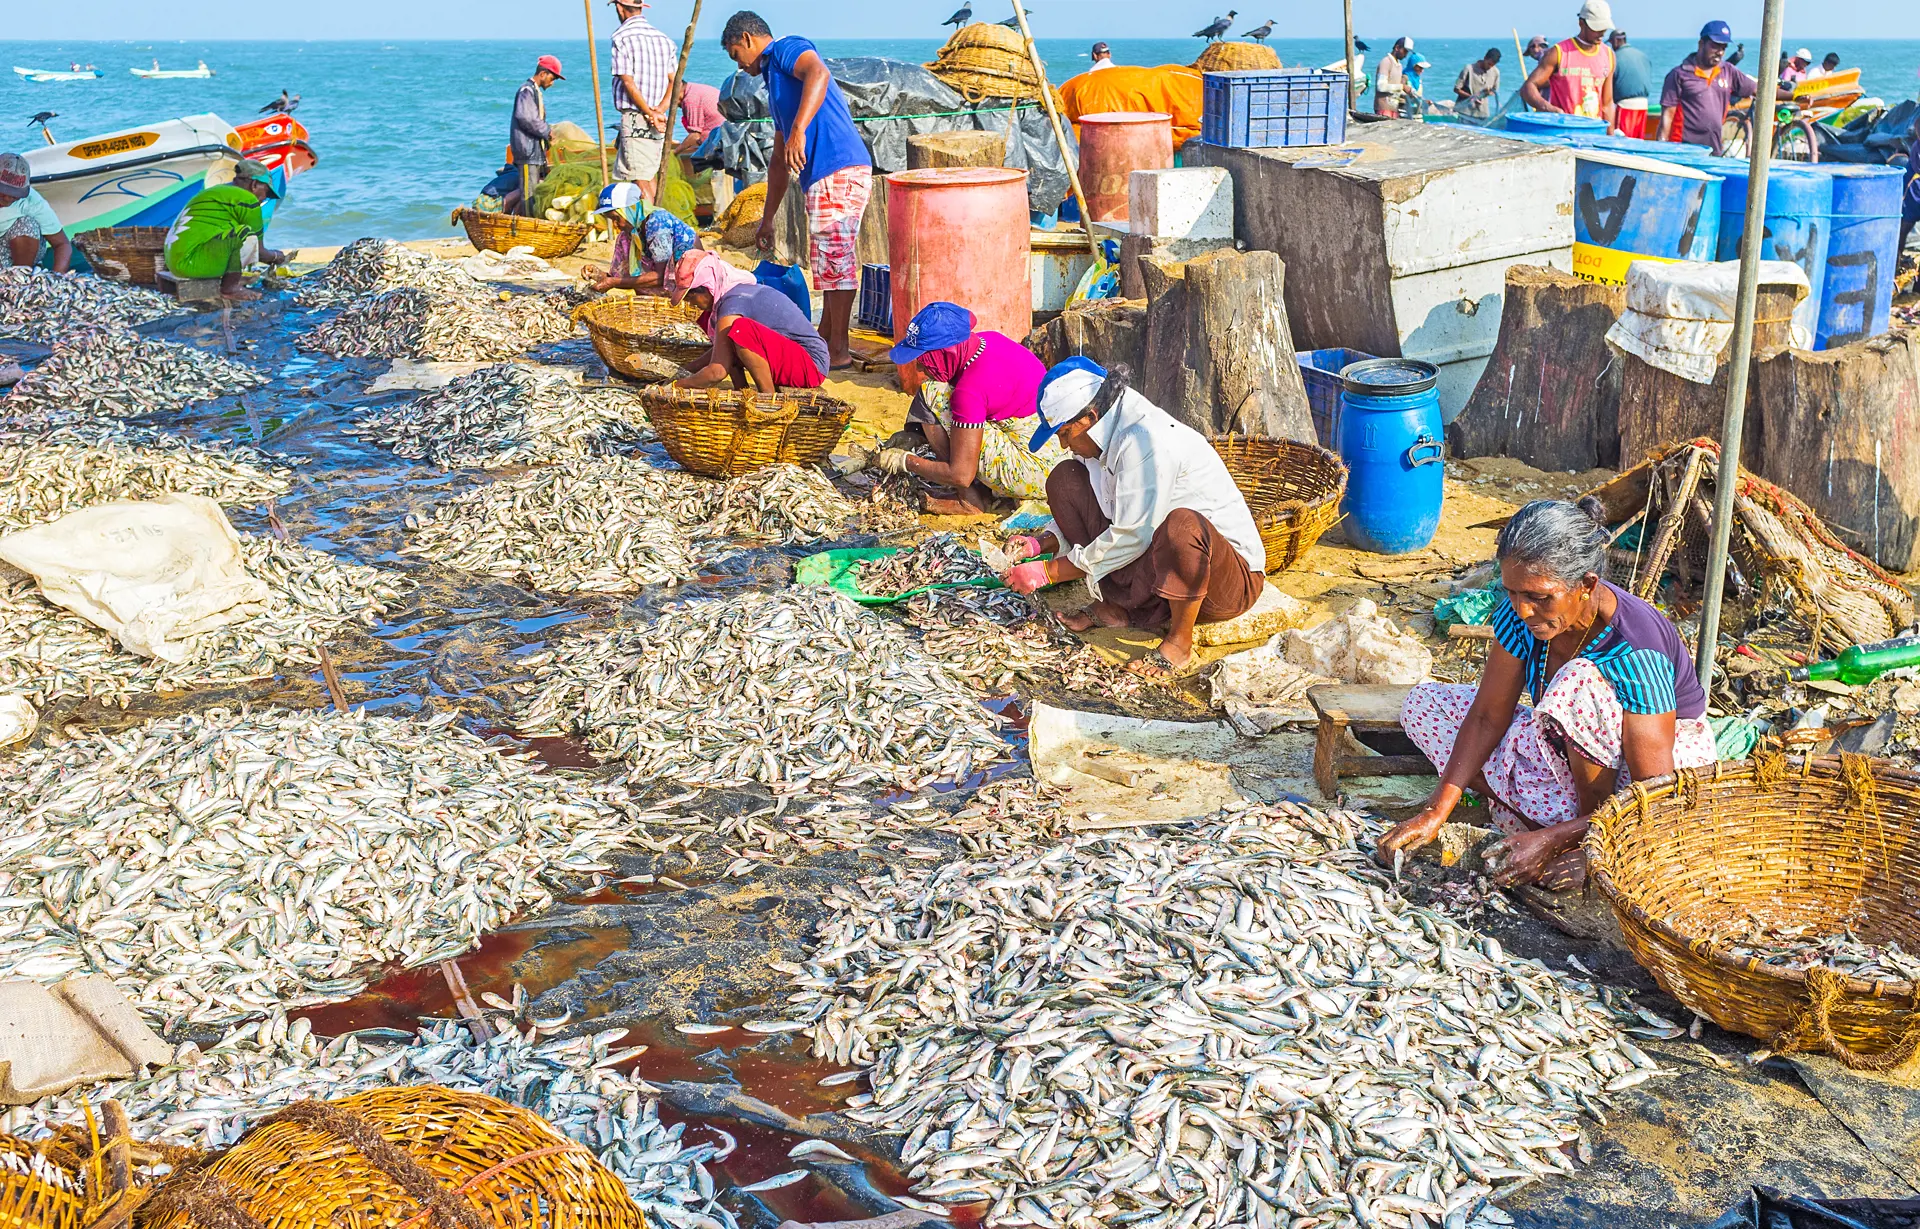 shutterstock_577659298 NEGOMBO, SRI LANKA - NOVEMBER 25, 2016 Workers clean the heaps of anchovies and fold it to baskets, preparing for sale at the market (1).jpg